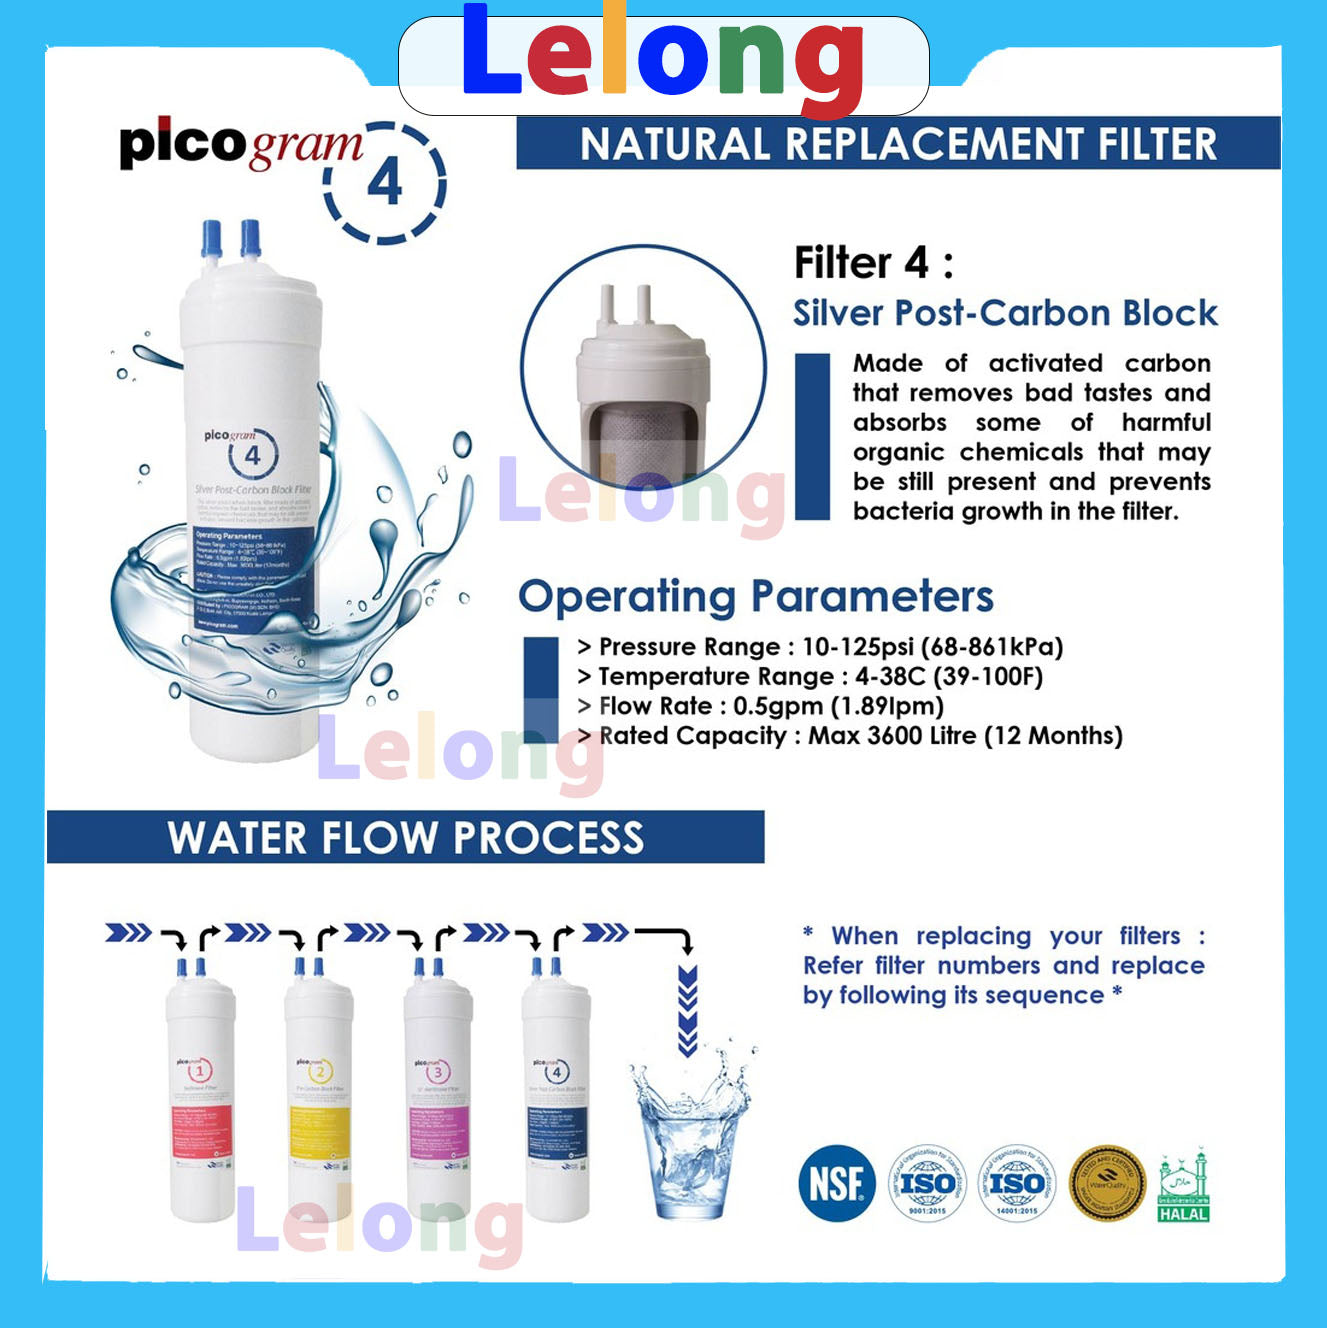 Korea Water Filters Ultra-Fine Water Filtration replacement cartridge for LL830, LL300, Tong Yang Magic 9900c, 8900c, 8230c, 8201c Korea Water Filters water purifier Korea Filter Korea Water Filter Cartridge Korea Water Filtration Korea Purification